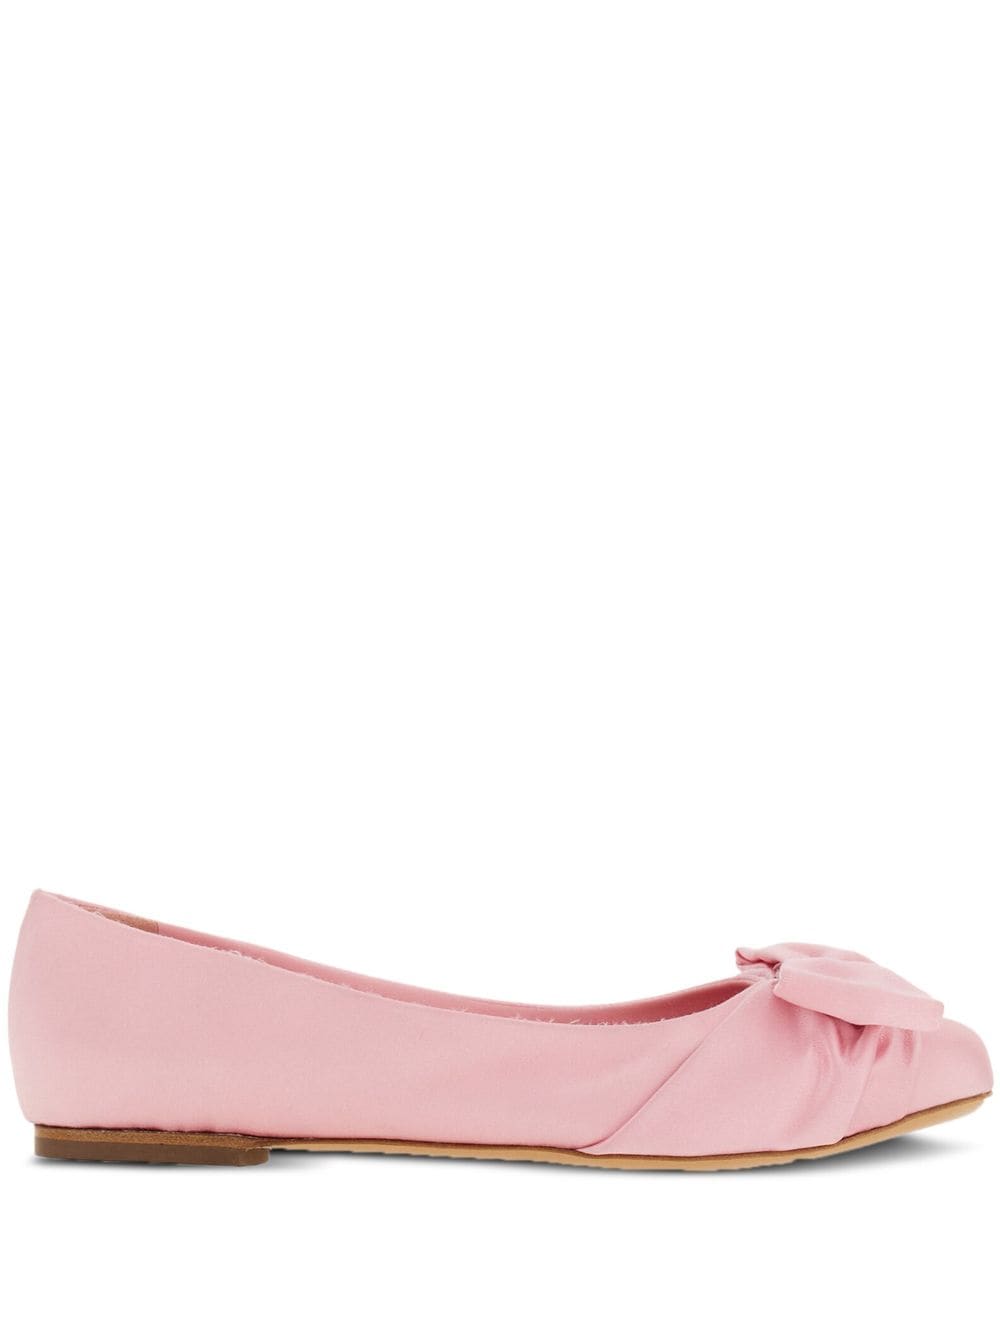 Ferragamo Vara bow-detailing leather loafers - Pink